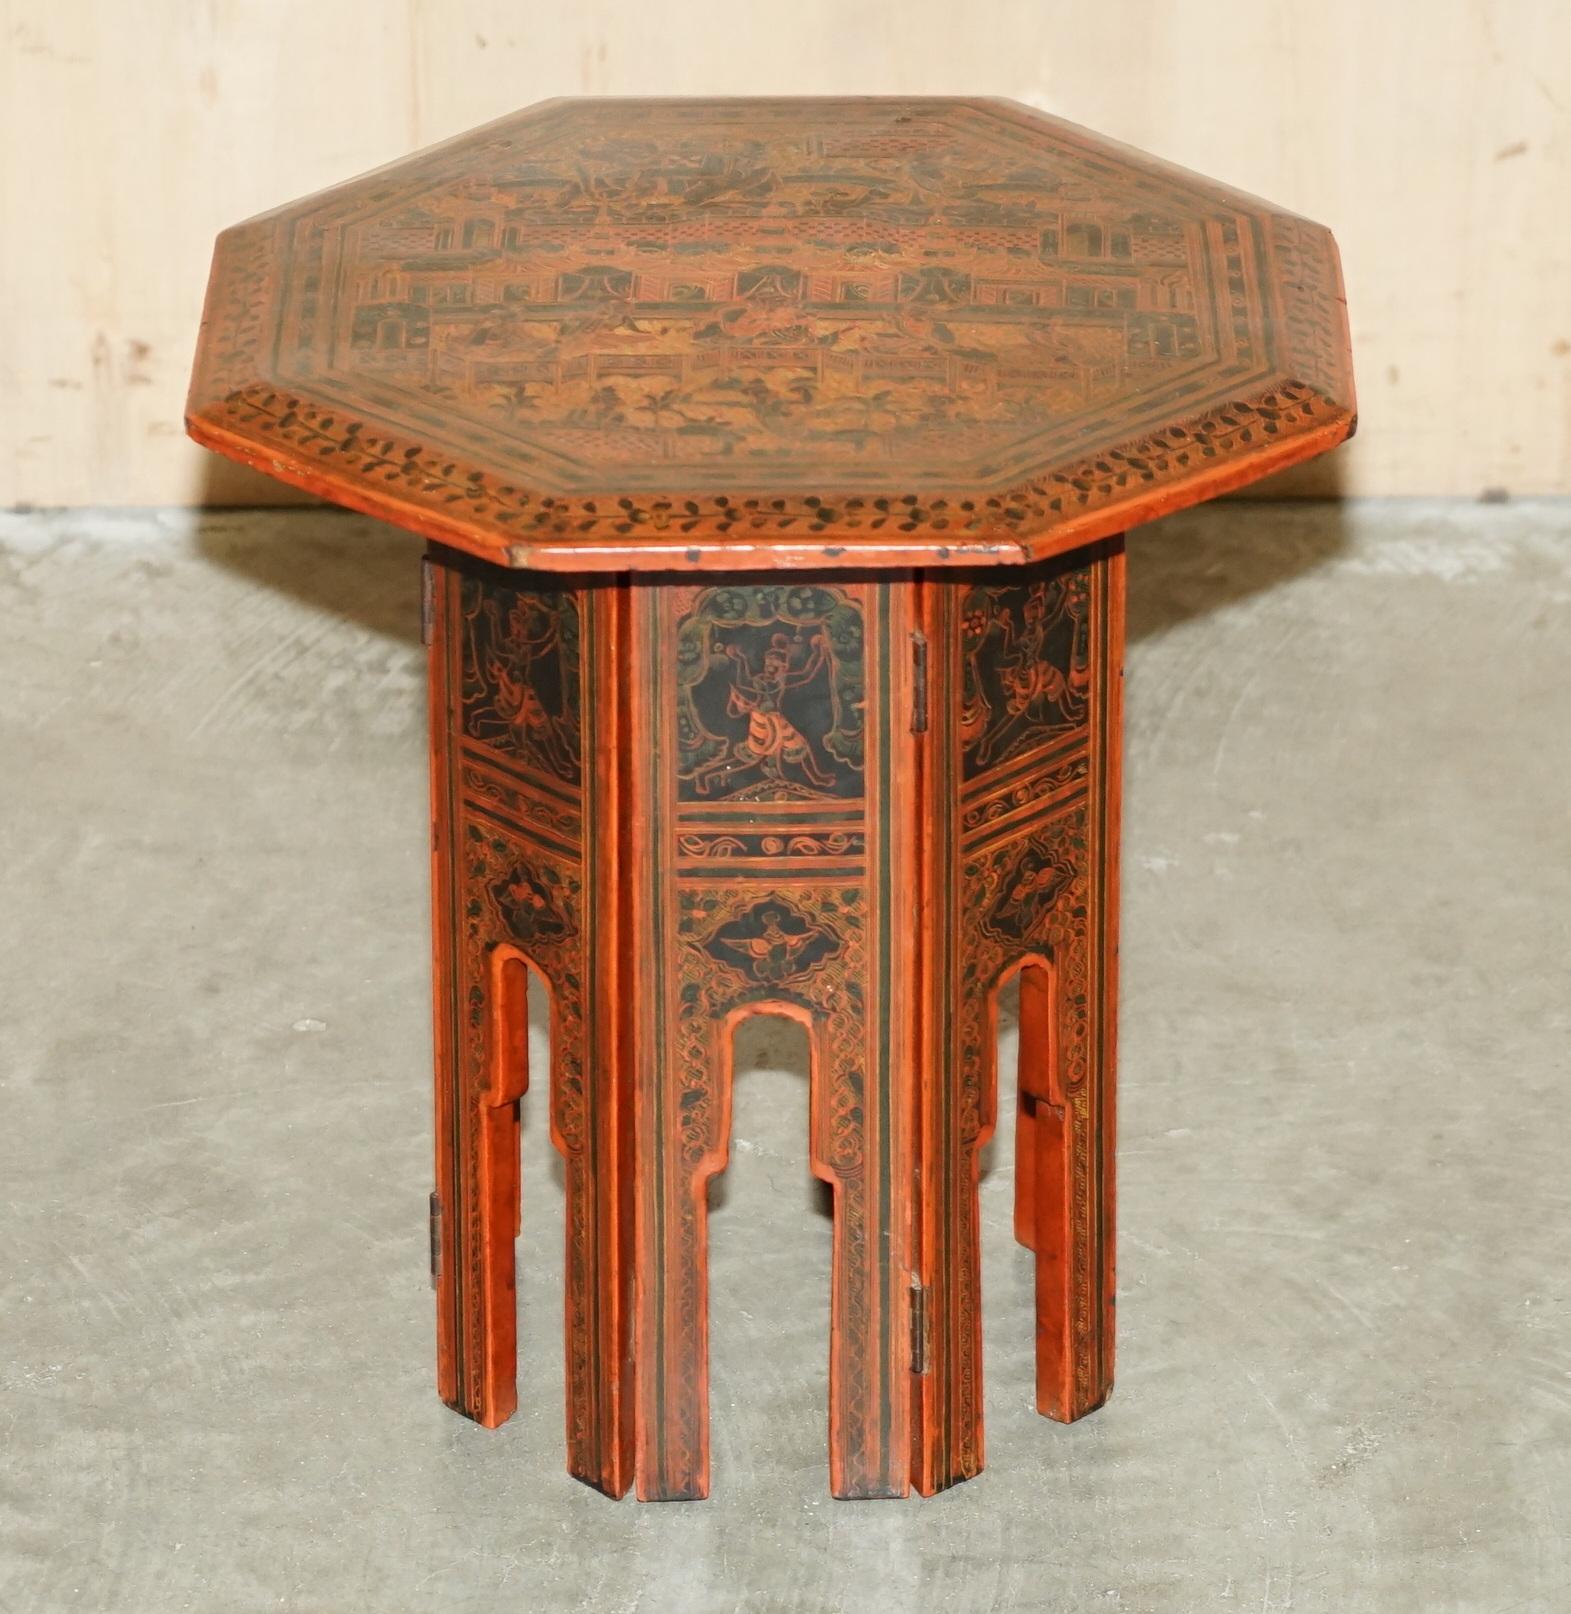 Royal House Antiques

Royal House Antiques is delighted to offer for sale this exquisite antique circa 1920's Burmese side end table with ornately hand painted and lacquered finish  

Please note the delivery fee listed is just a guide, it covers